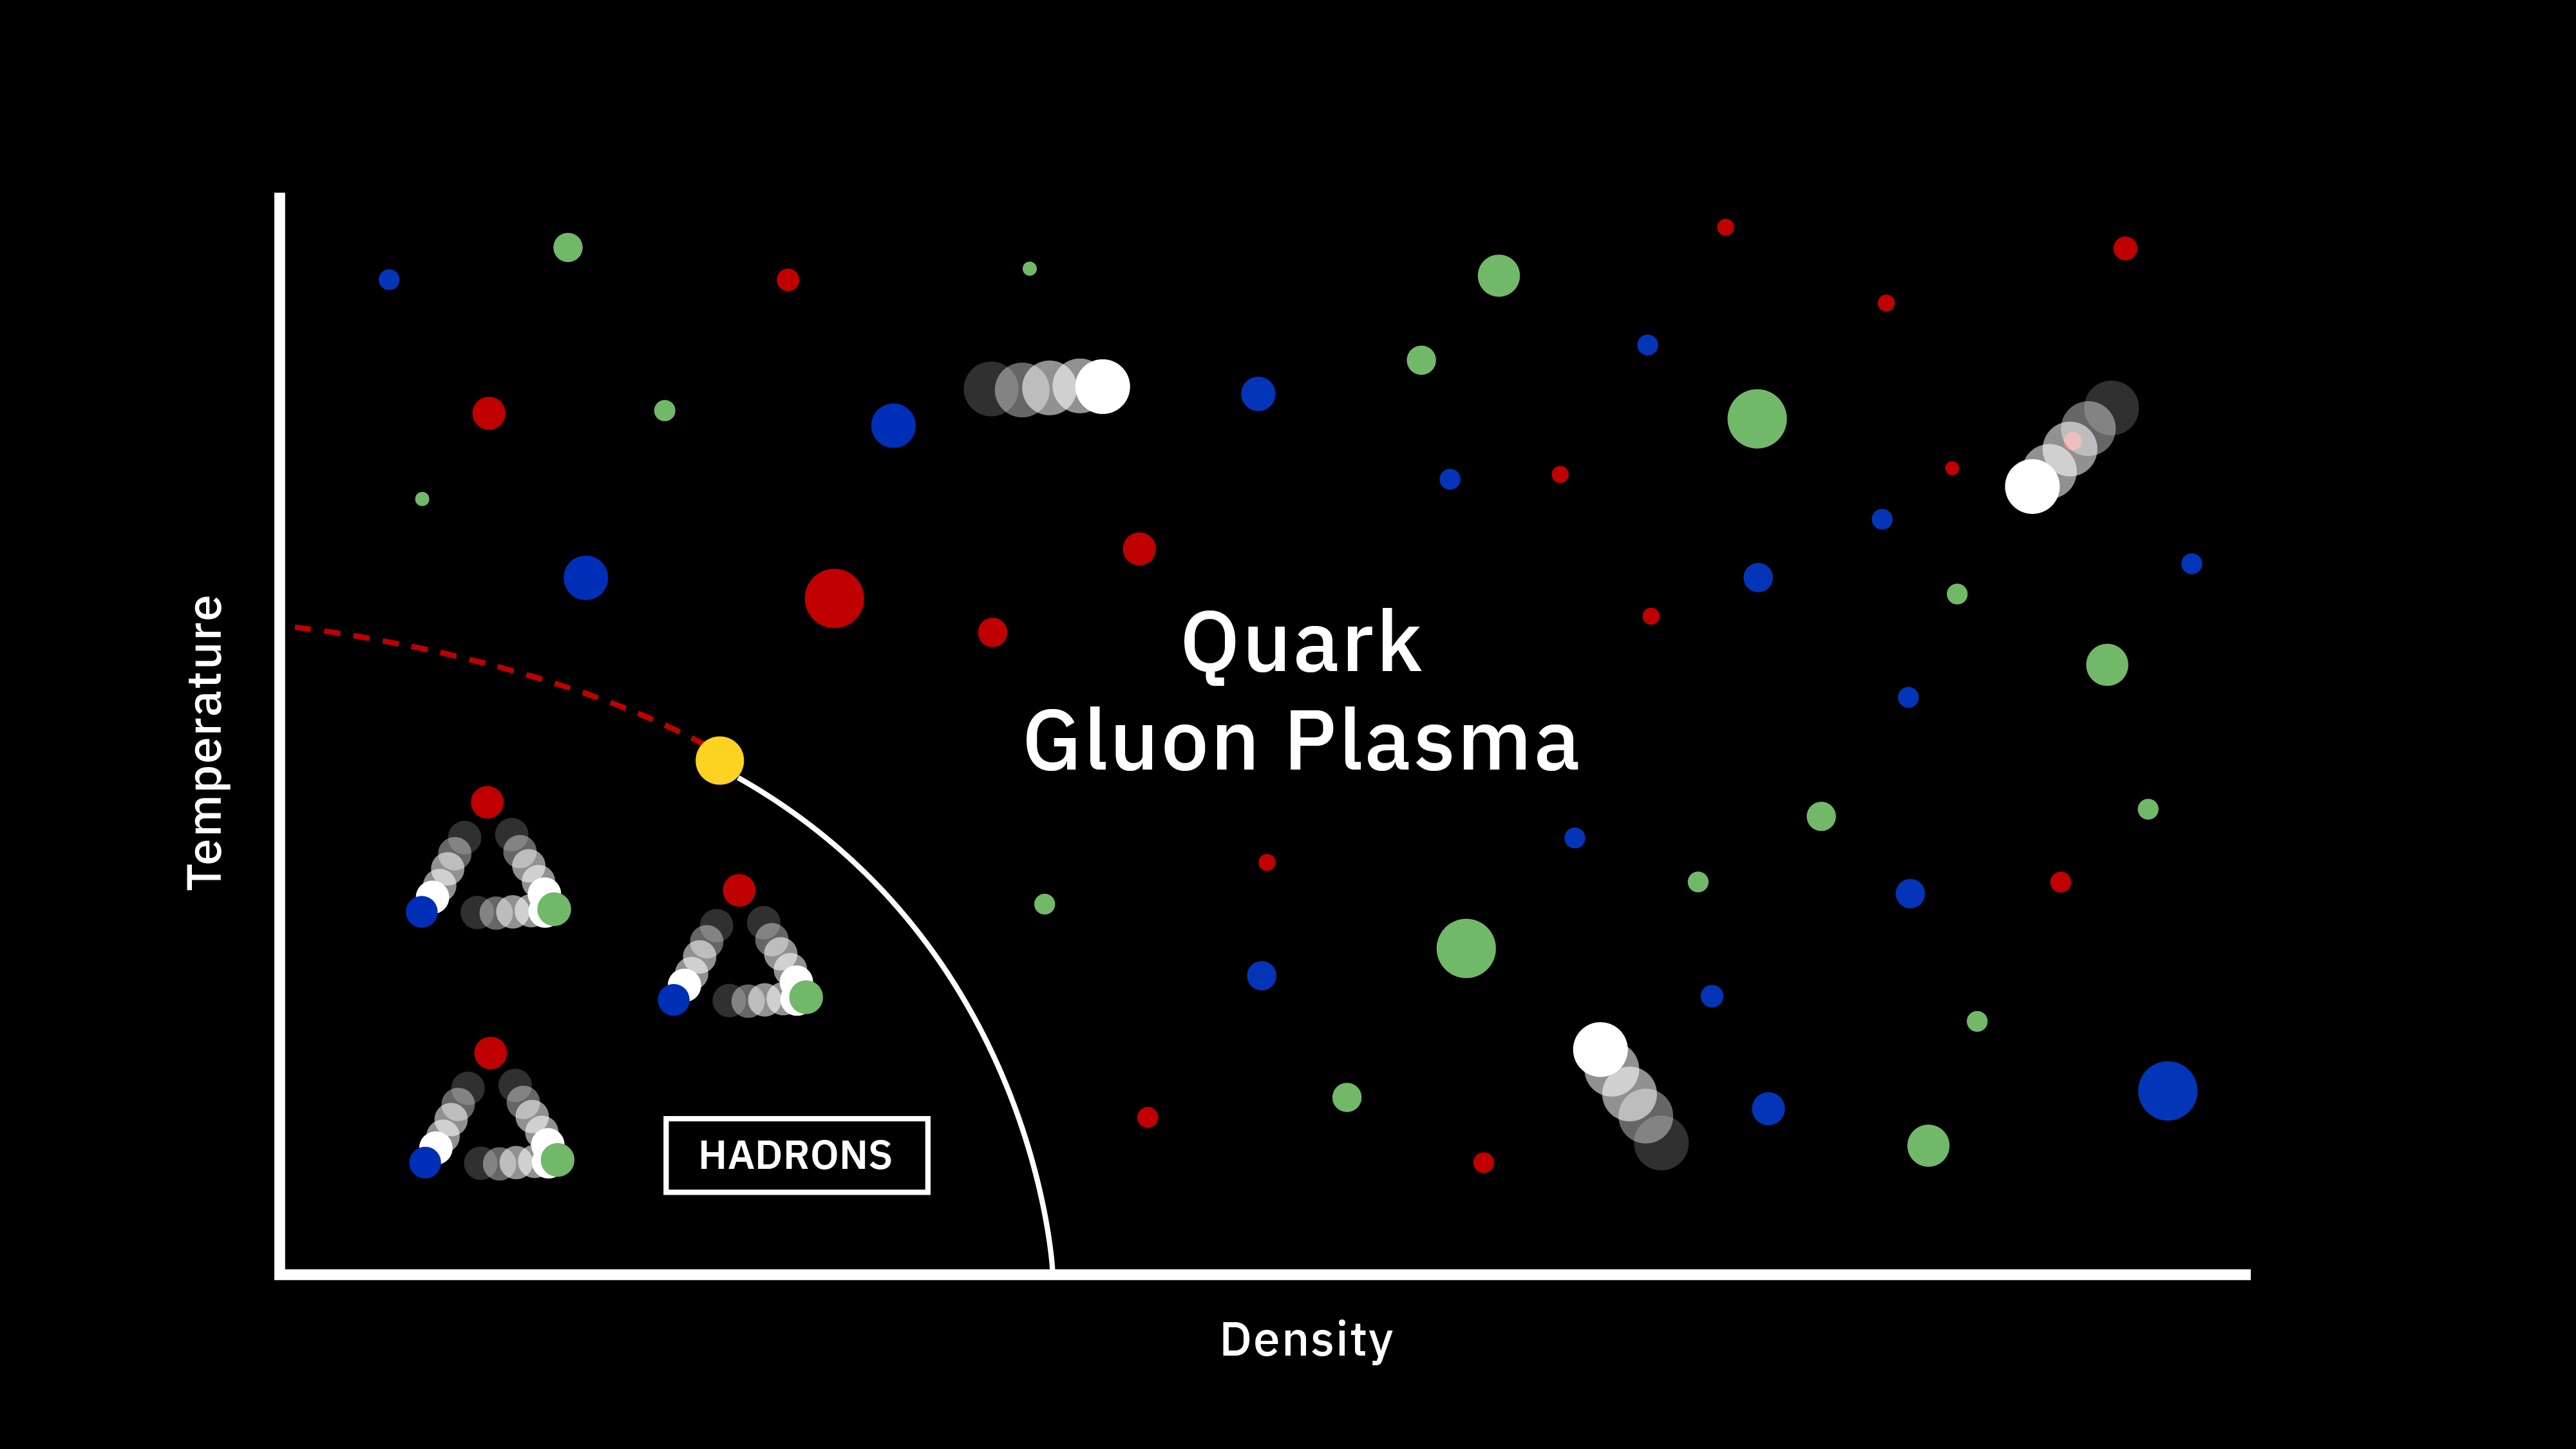 Diagram illustrating the phase transition between hadronic matter, where protons and neutrons are formed, and quark-gluon plasma as a function of temperature and density.